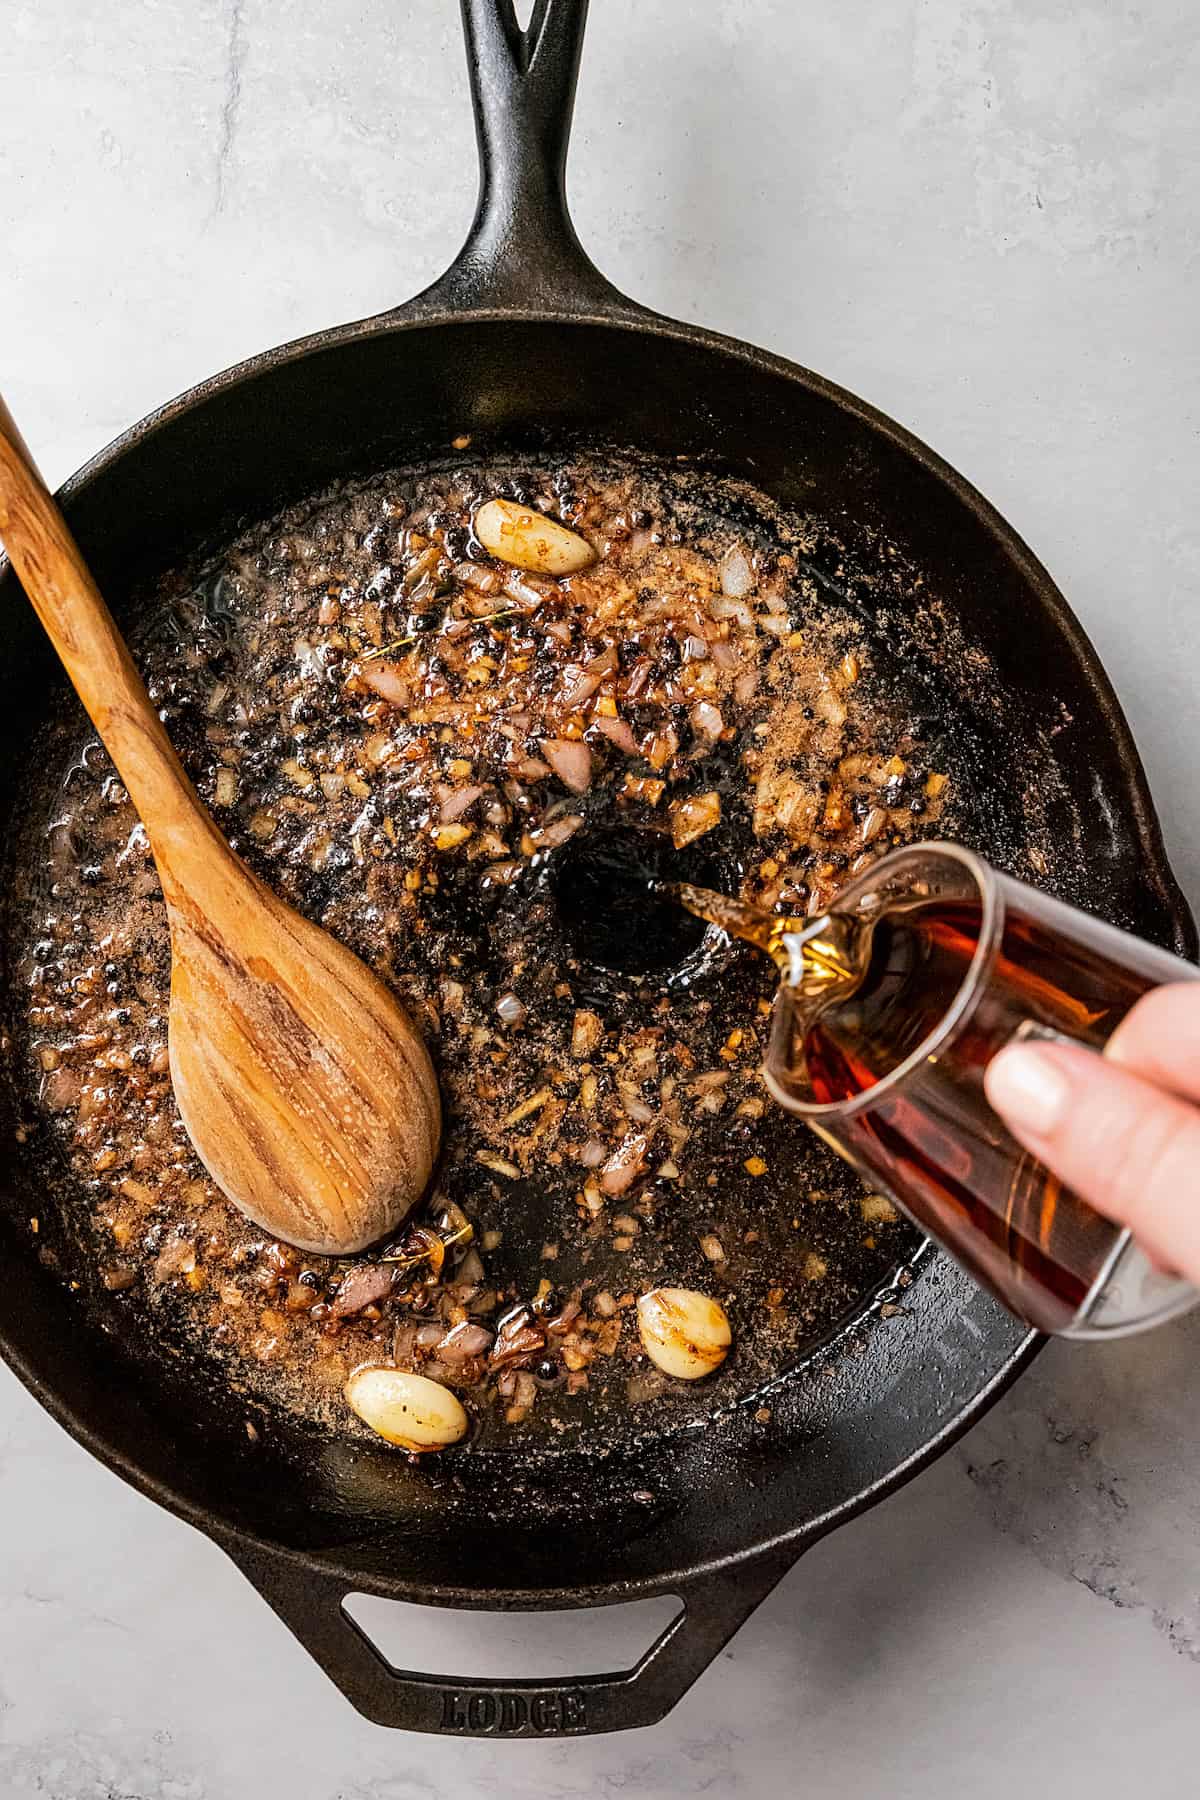 Red wine being poured into a skillet to deglaze.